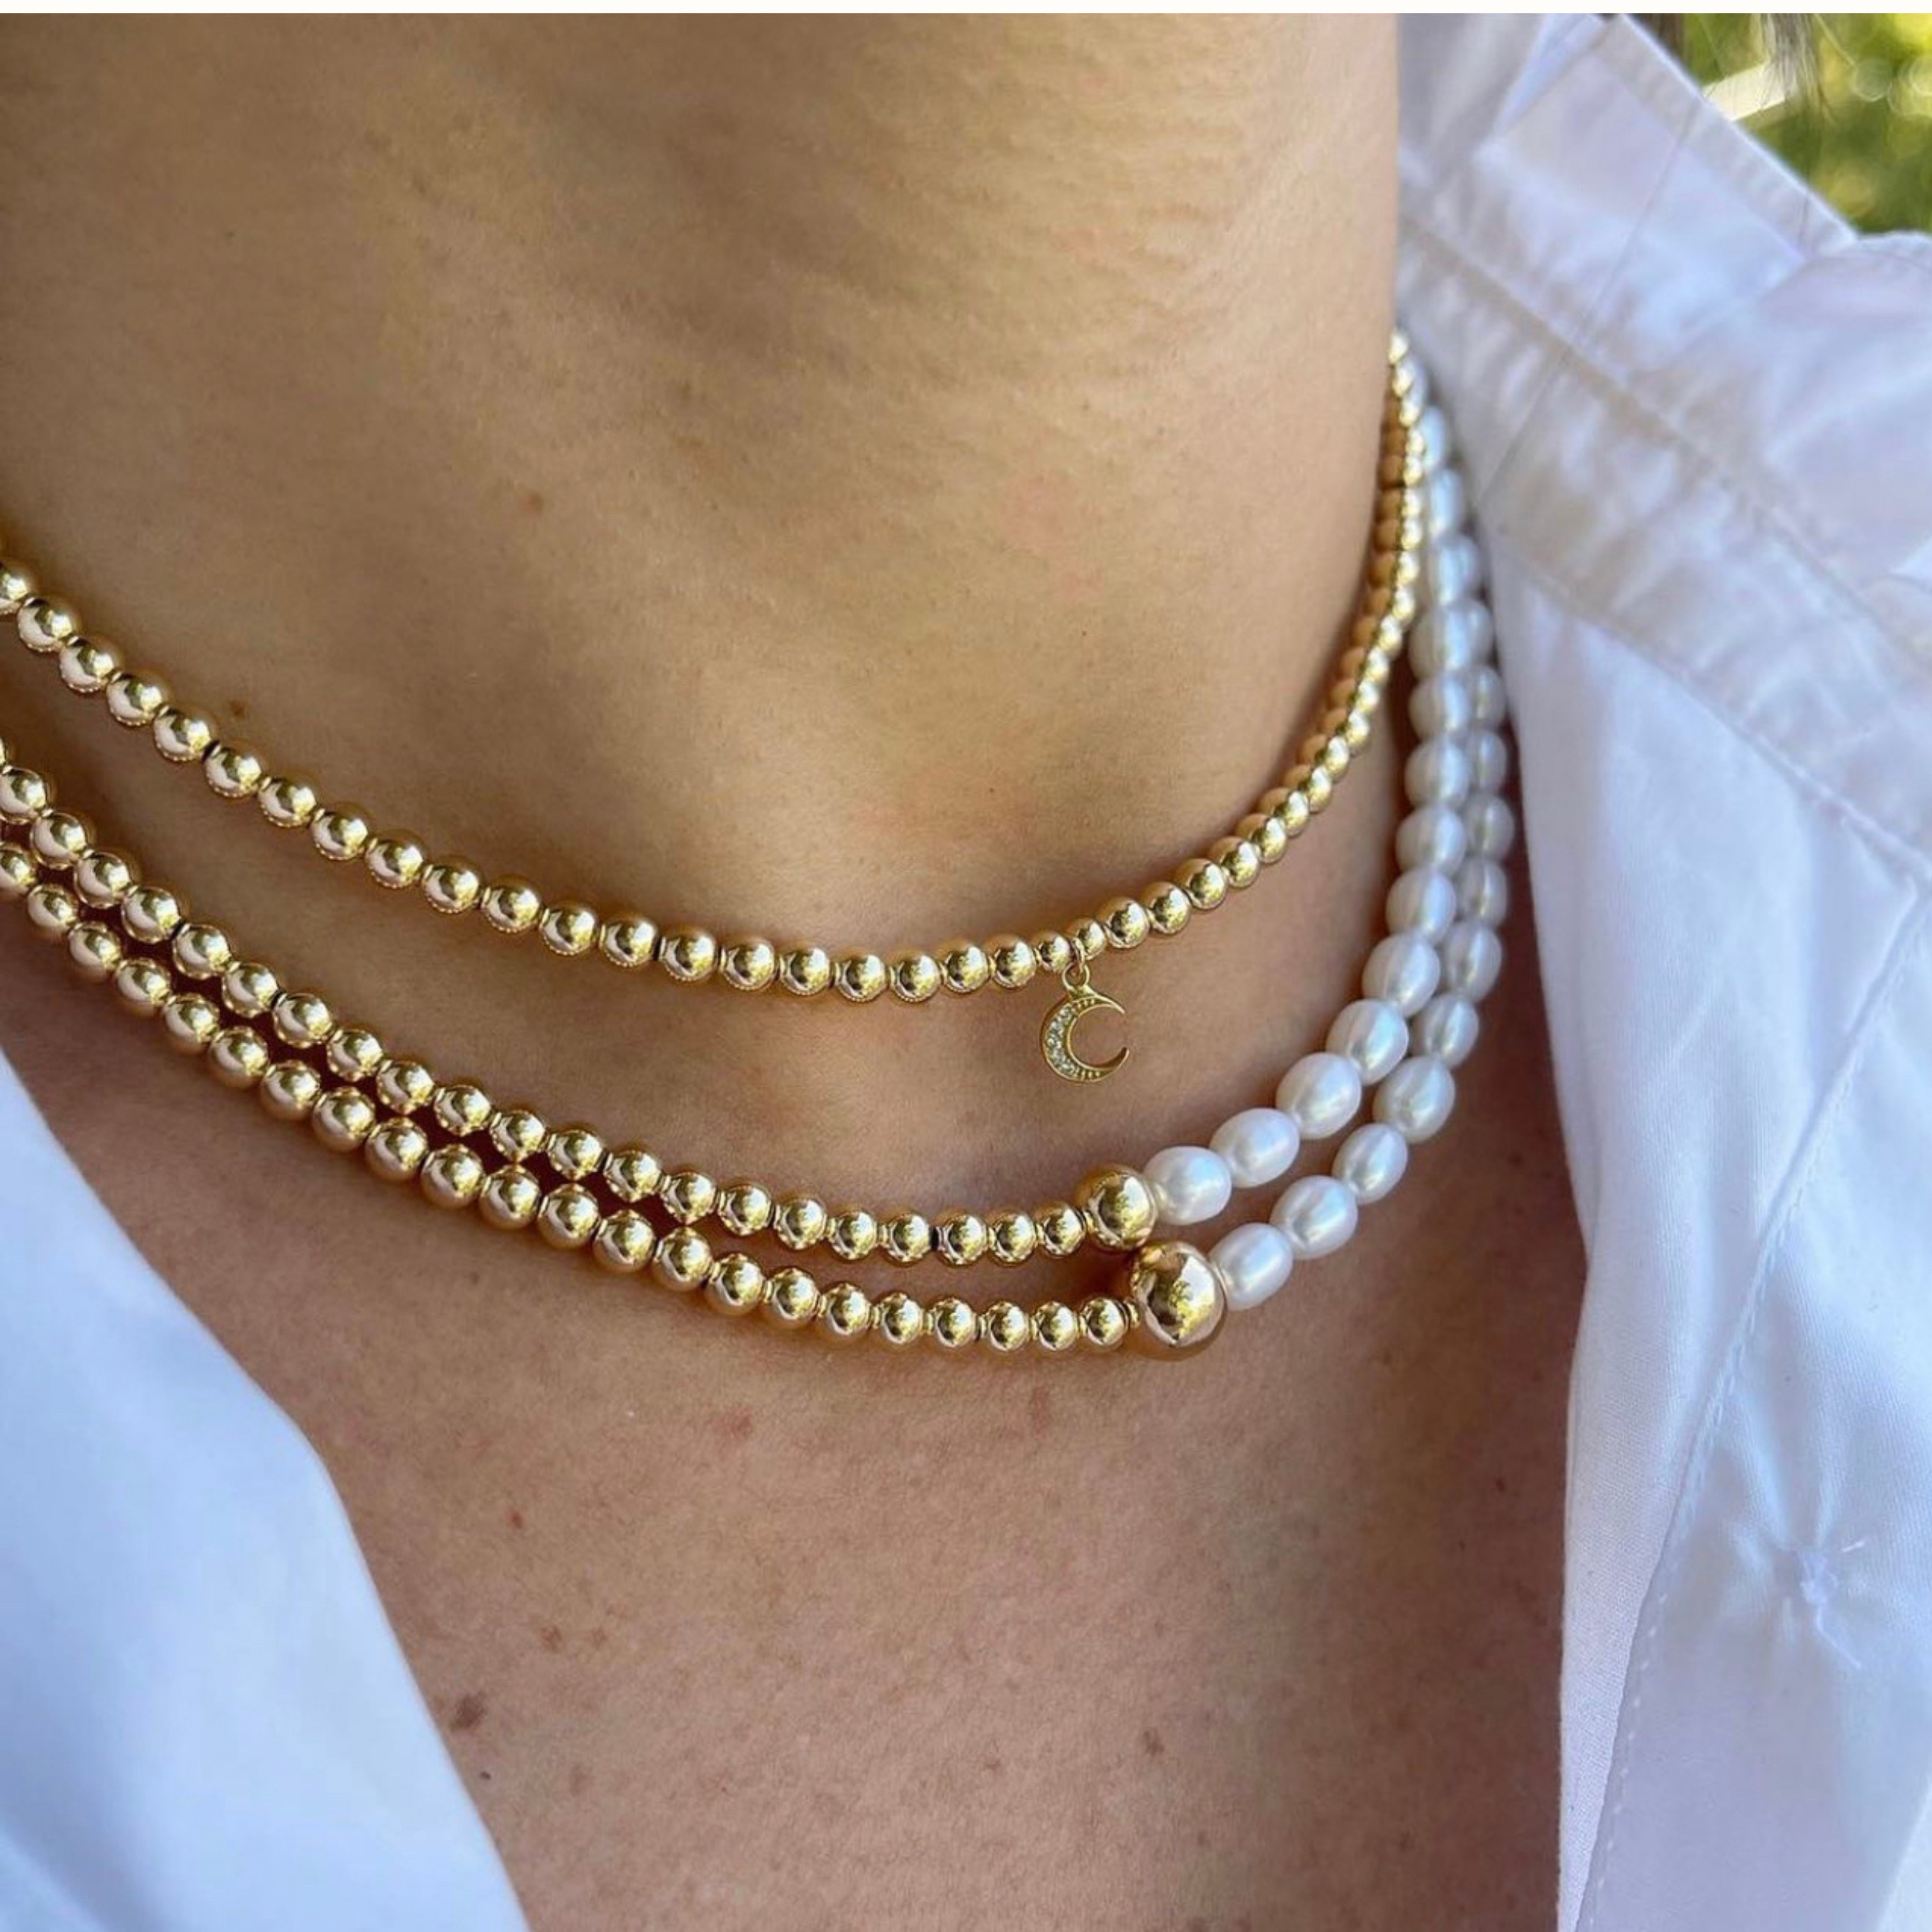 Half Pearl Half Chain Necklace Choker, with Gold Coin Charm | Handmade  fashion jewelry, Handmade wire jewelry, Black gold jewelry